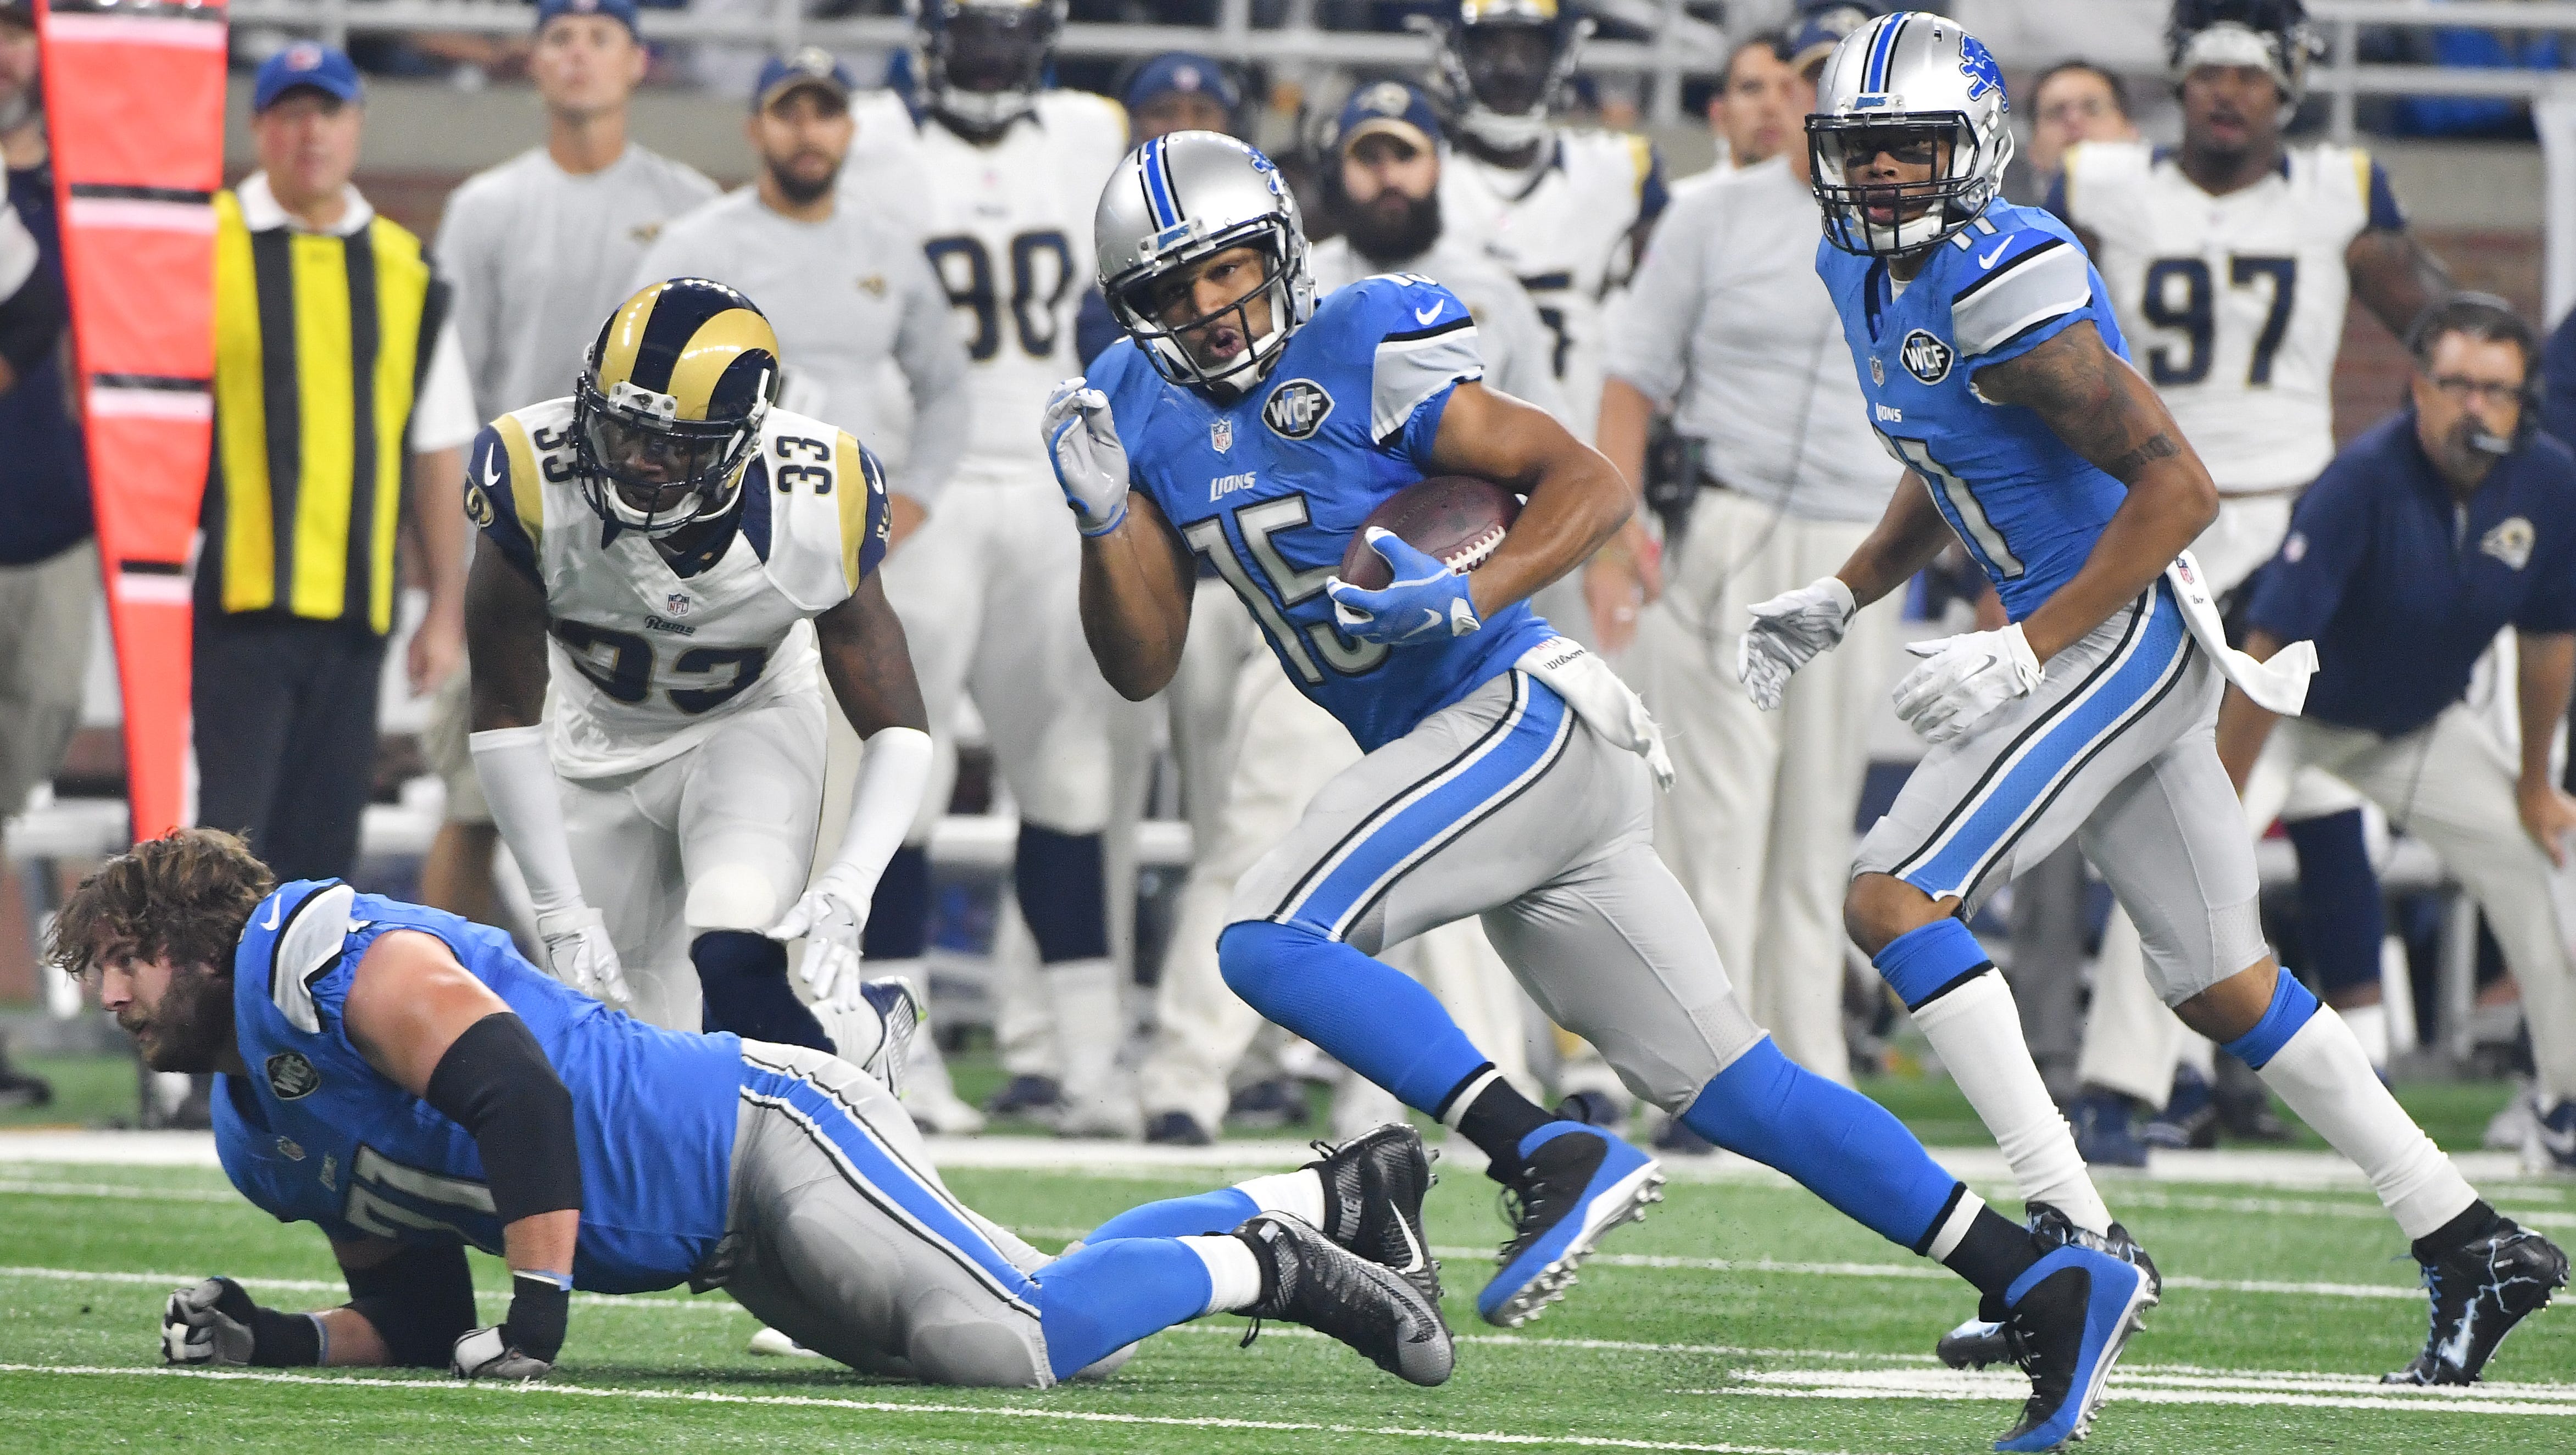 Lions wide receiver Golden Tate scrambles up field after a reception in the first quarter.